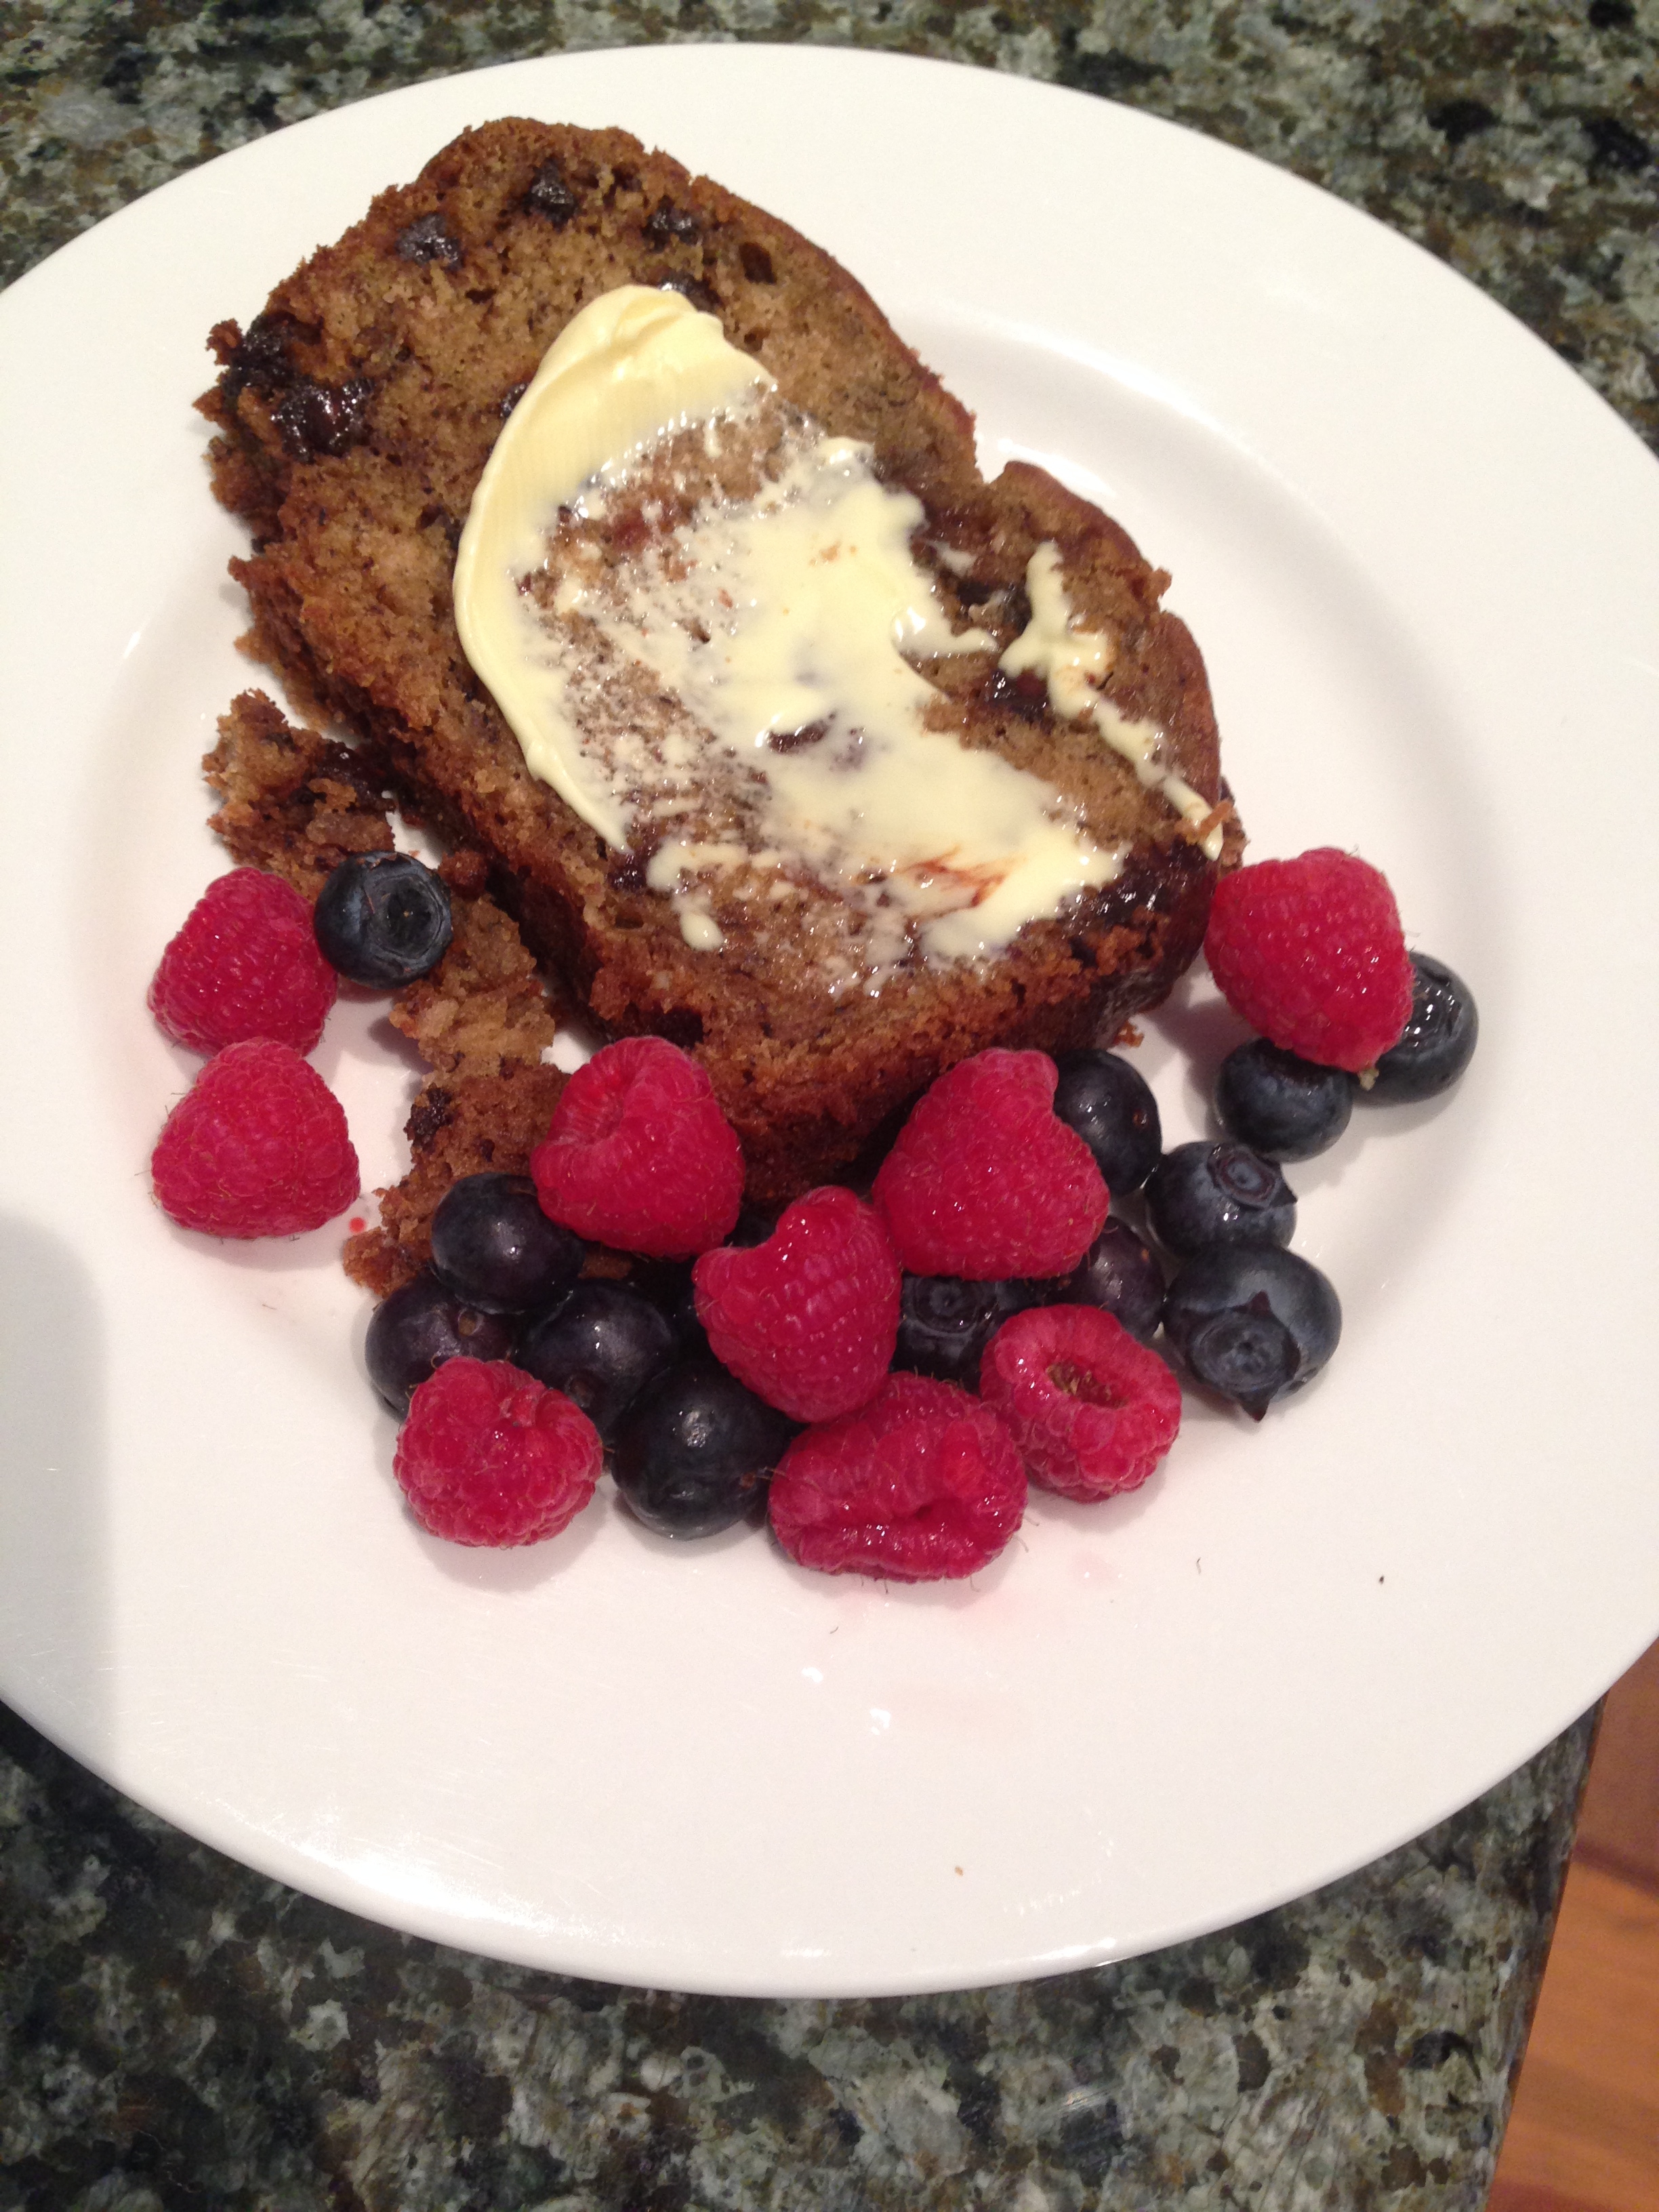 Banana chocolate chip bread with berries on white plate